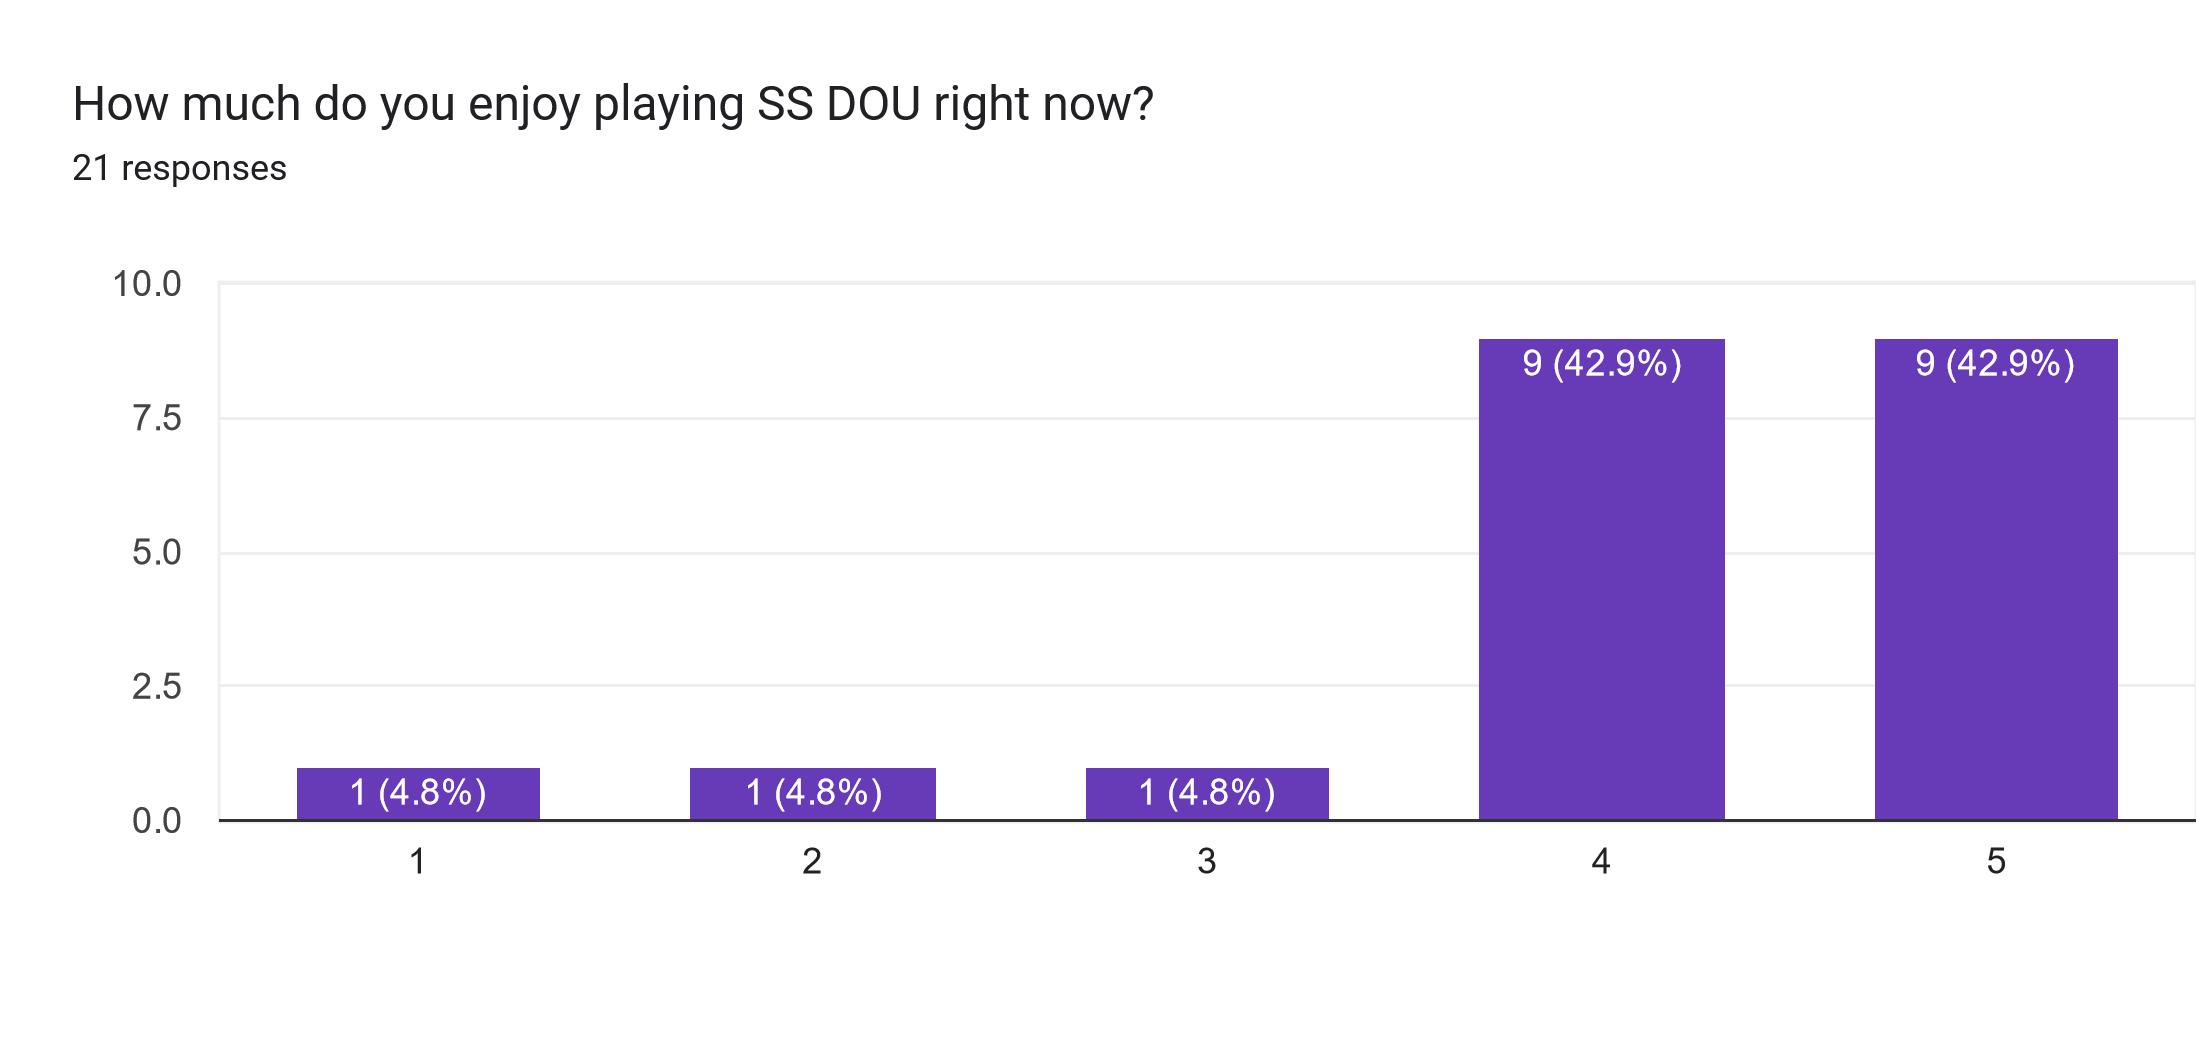 Forms response chart. Question title: How much do you enjoy playing SS DOU right now?. Number of responses: 21 responses.